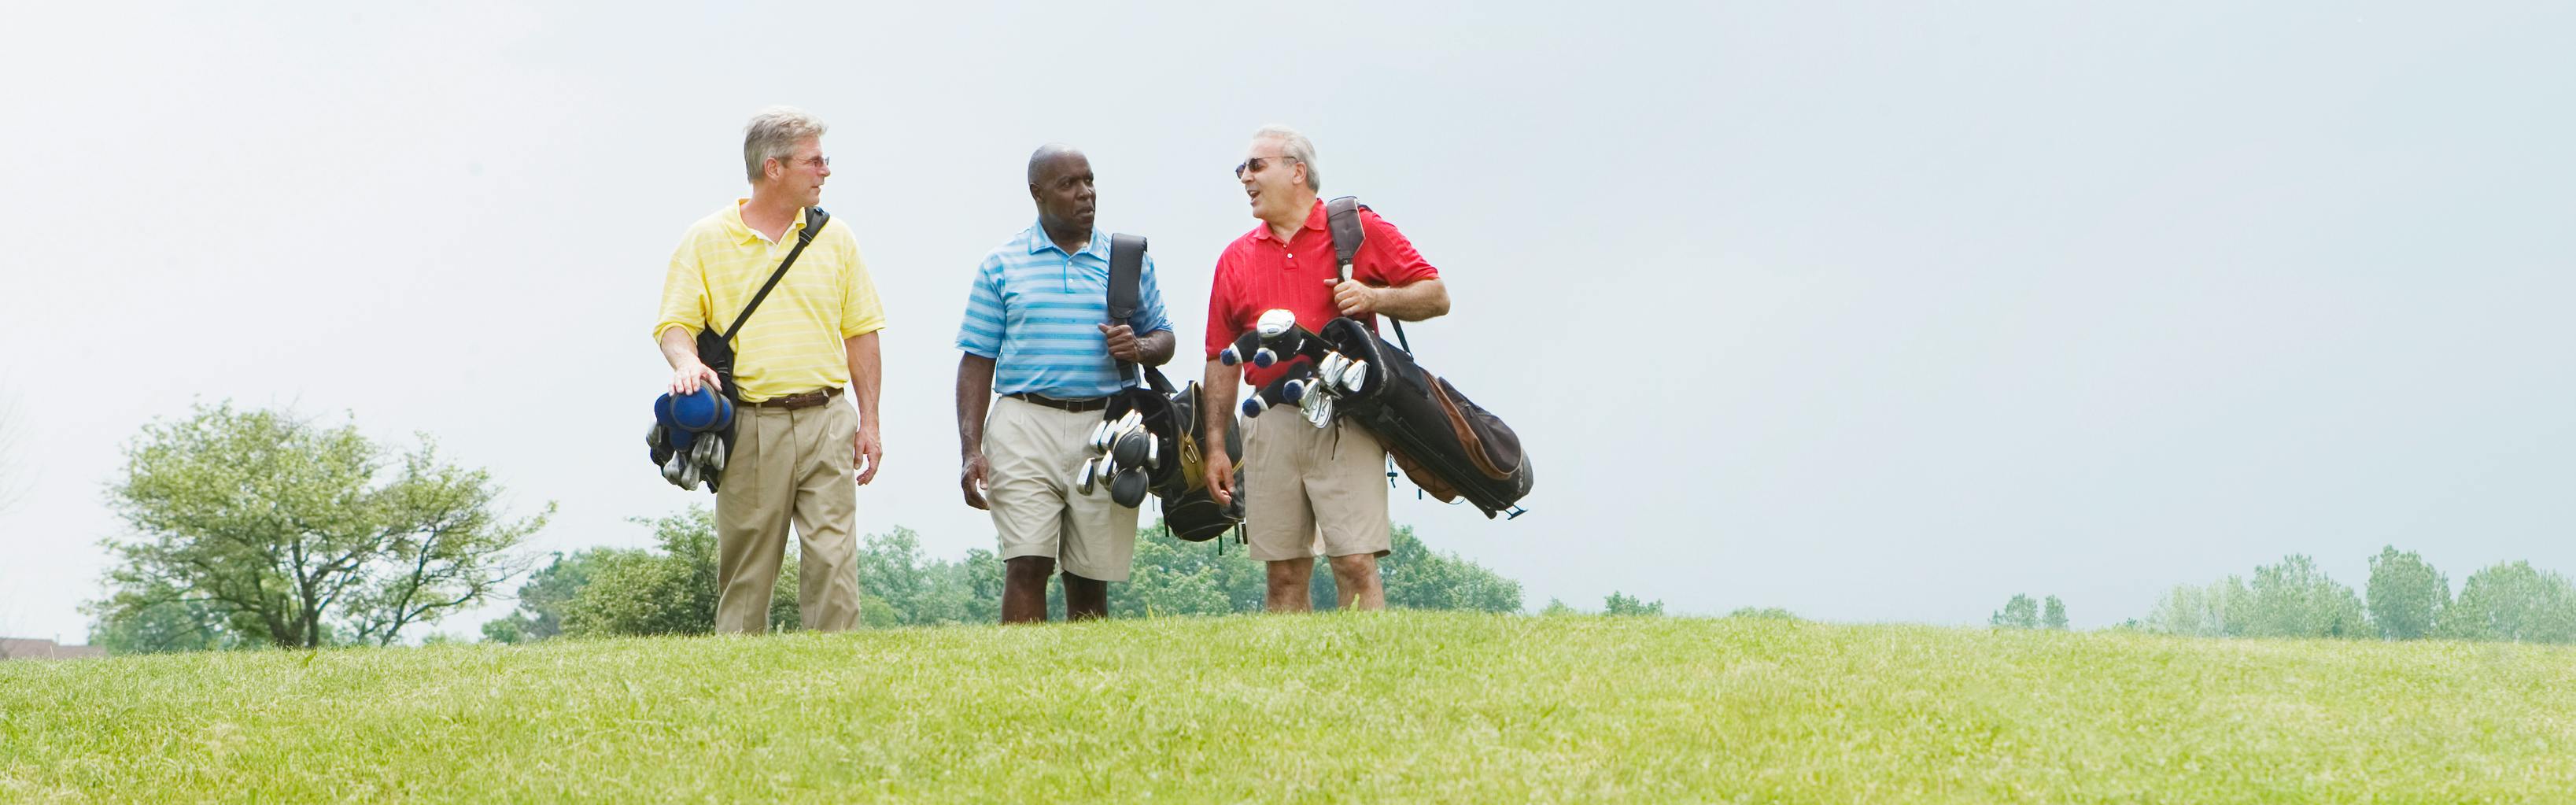 Three older men talk while walking across a golf course. All three carry bags of golf clubs